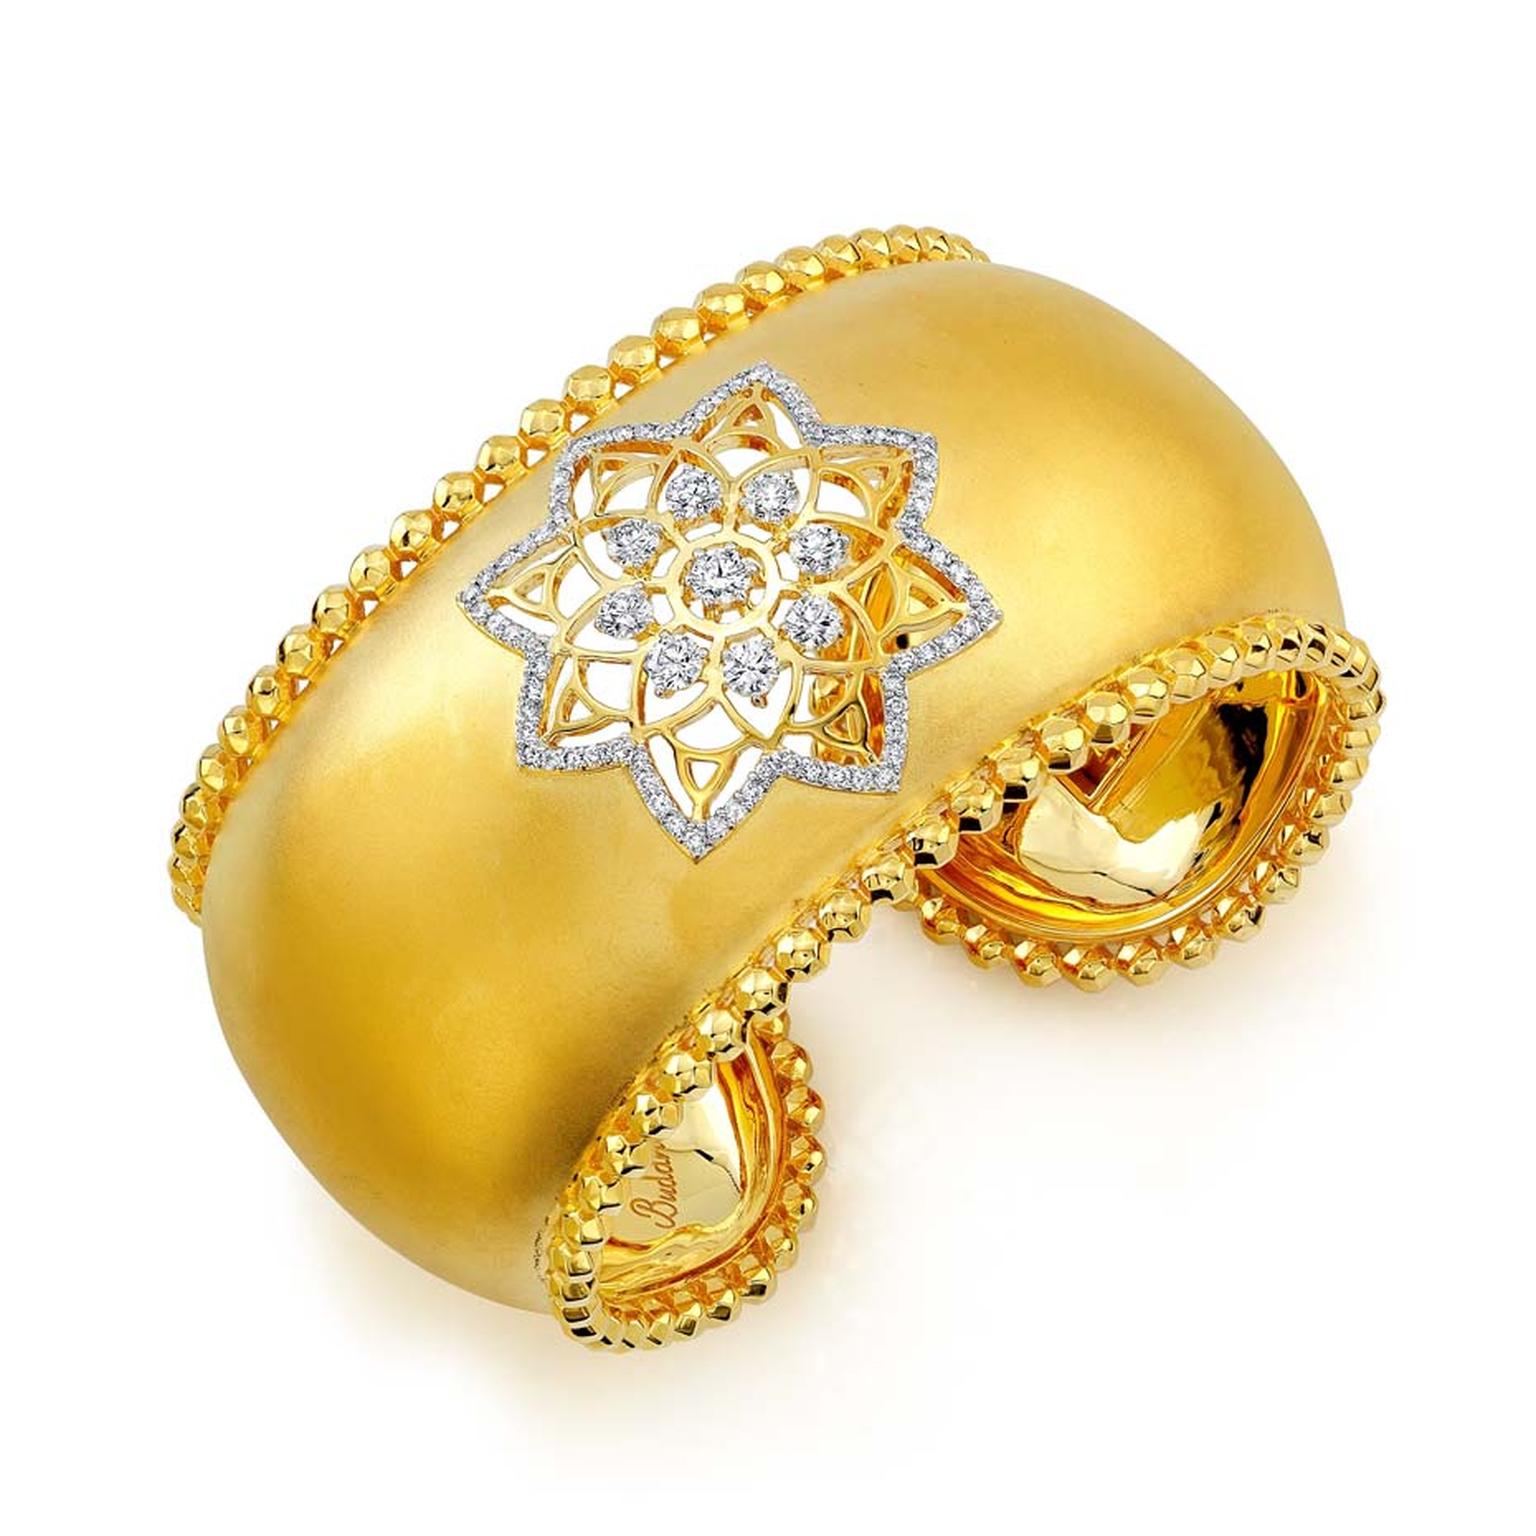 Buddha Mama Dharma Wheel cuff with a cut-out diamond mandala and hollow spheres around the borders ($28,400).